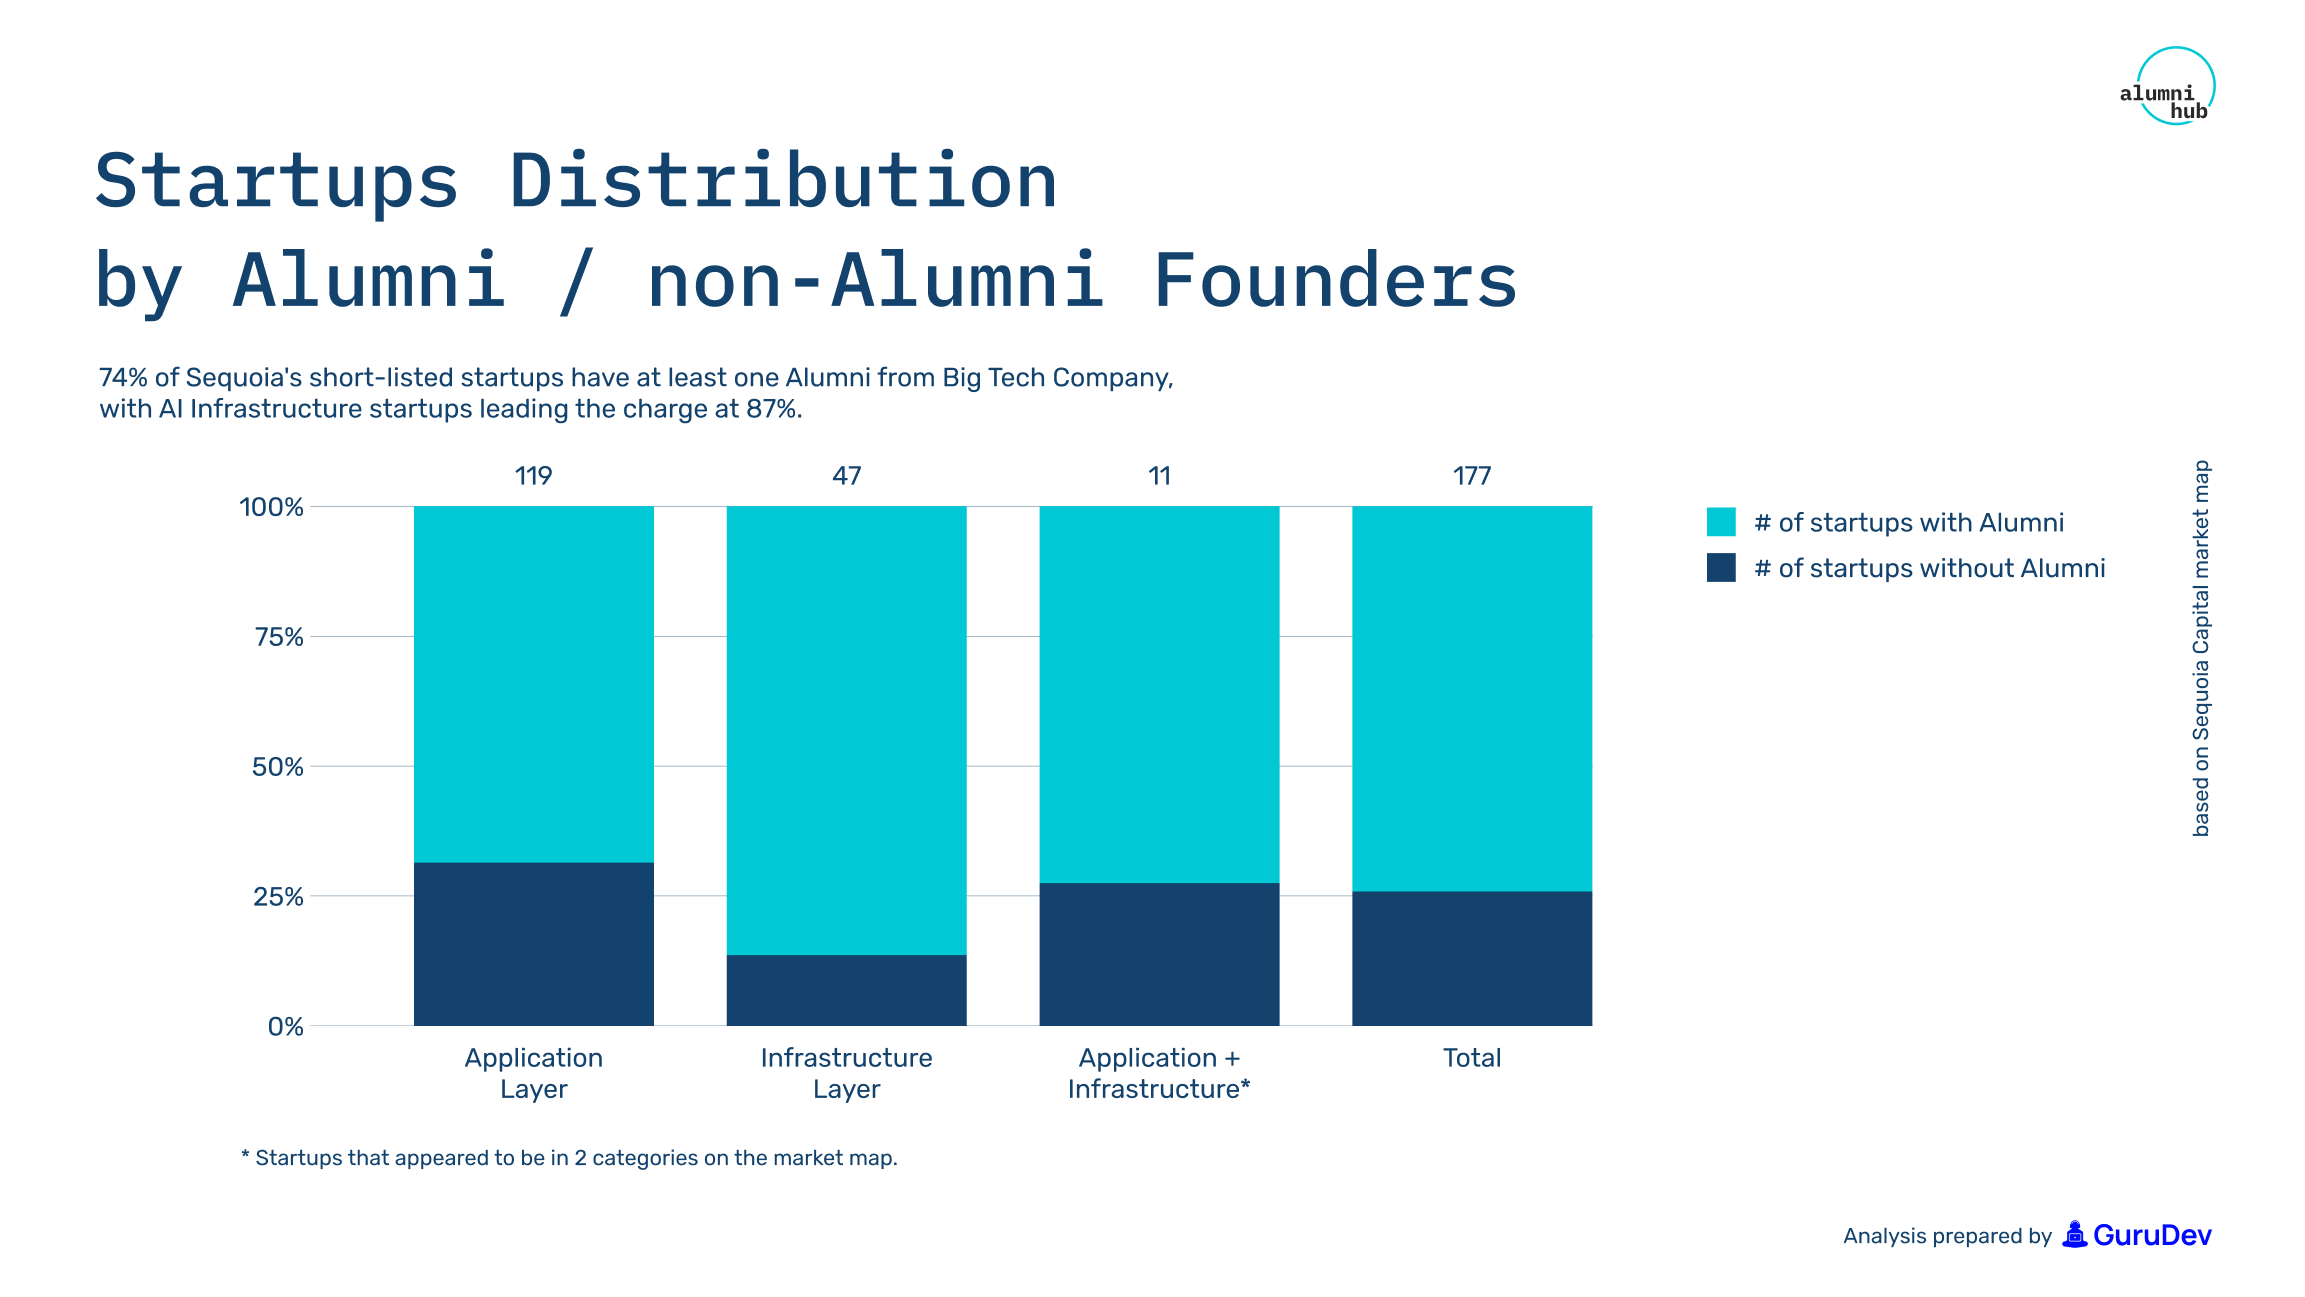 Bar chart showing startups distribution by Alumni and non-Alumni founders.